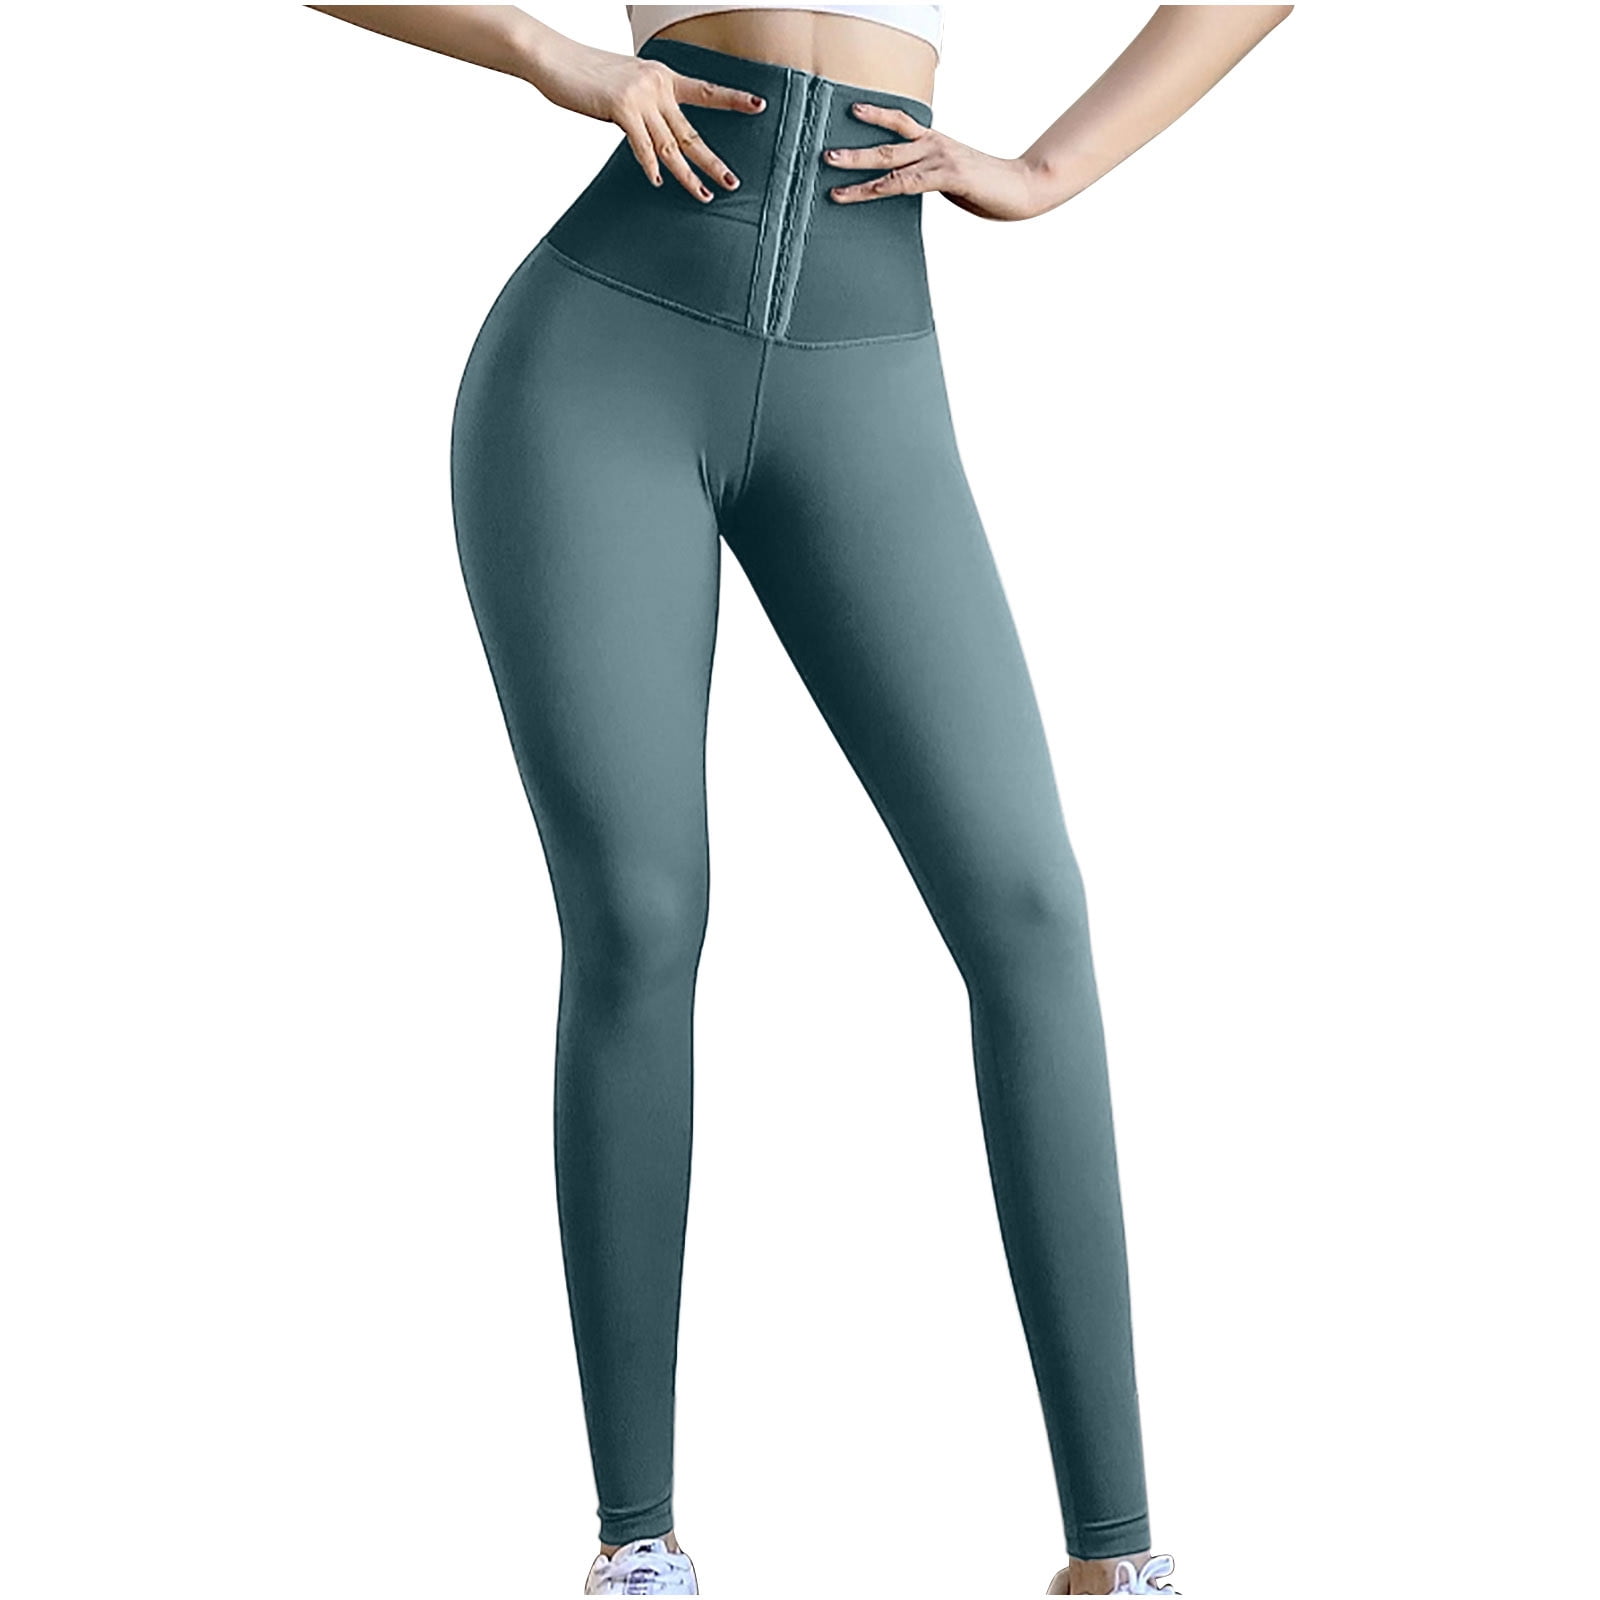 High Quality Activewear Capris With Pockets With High Waist, Hip Lift,  Elastic Drawstring, And Sweatpants For Jogging, Yoga, Fitness, Joga,  Workouts, Or Casual Wear From Svelte, $13.84